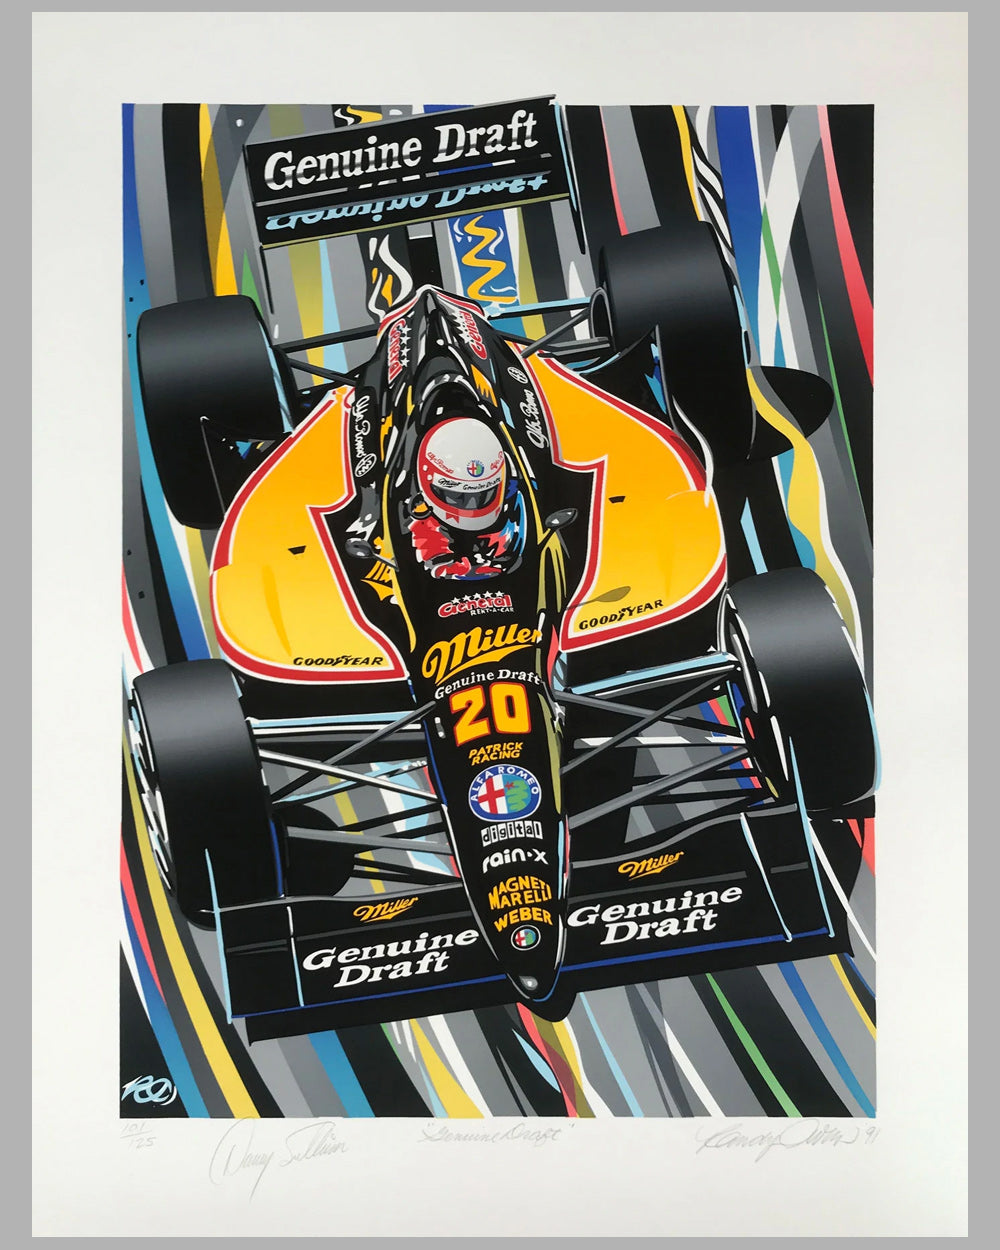 Genuine Draft serigraph by Randy Owens, autographed by Danny Sullivan